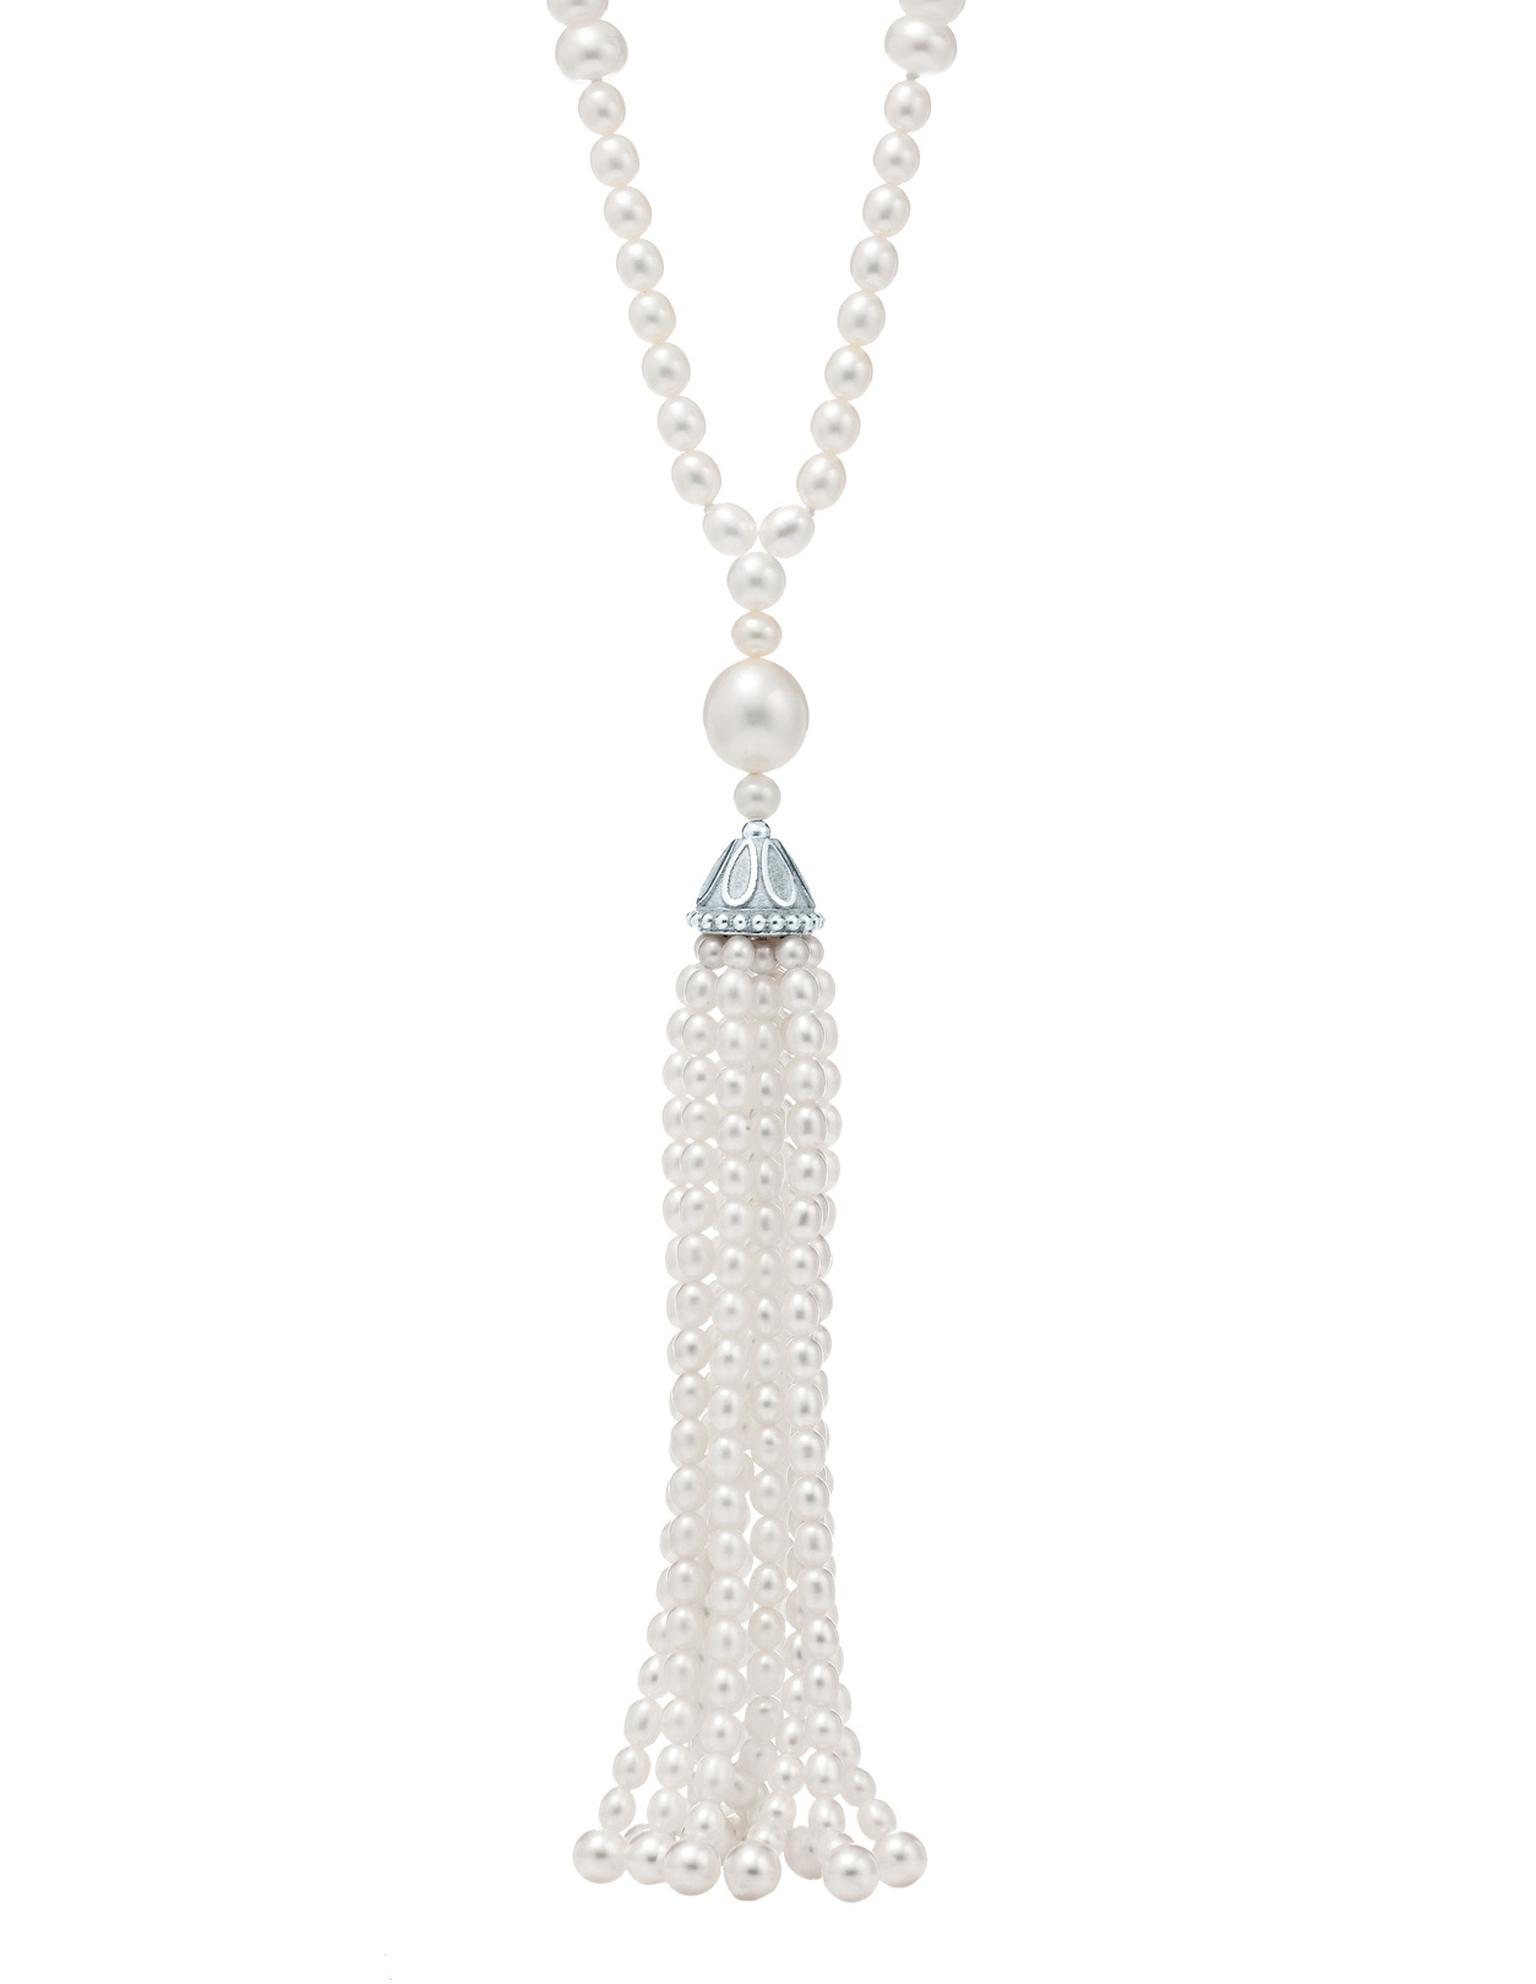 Ziegfeld-tassel-necklace-of-cultured-freshwater-pearls-with-sterling-silver